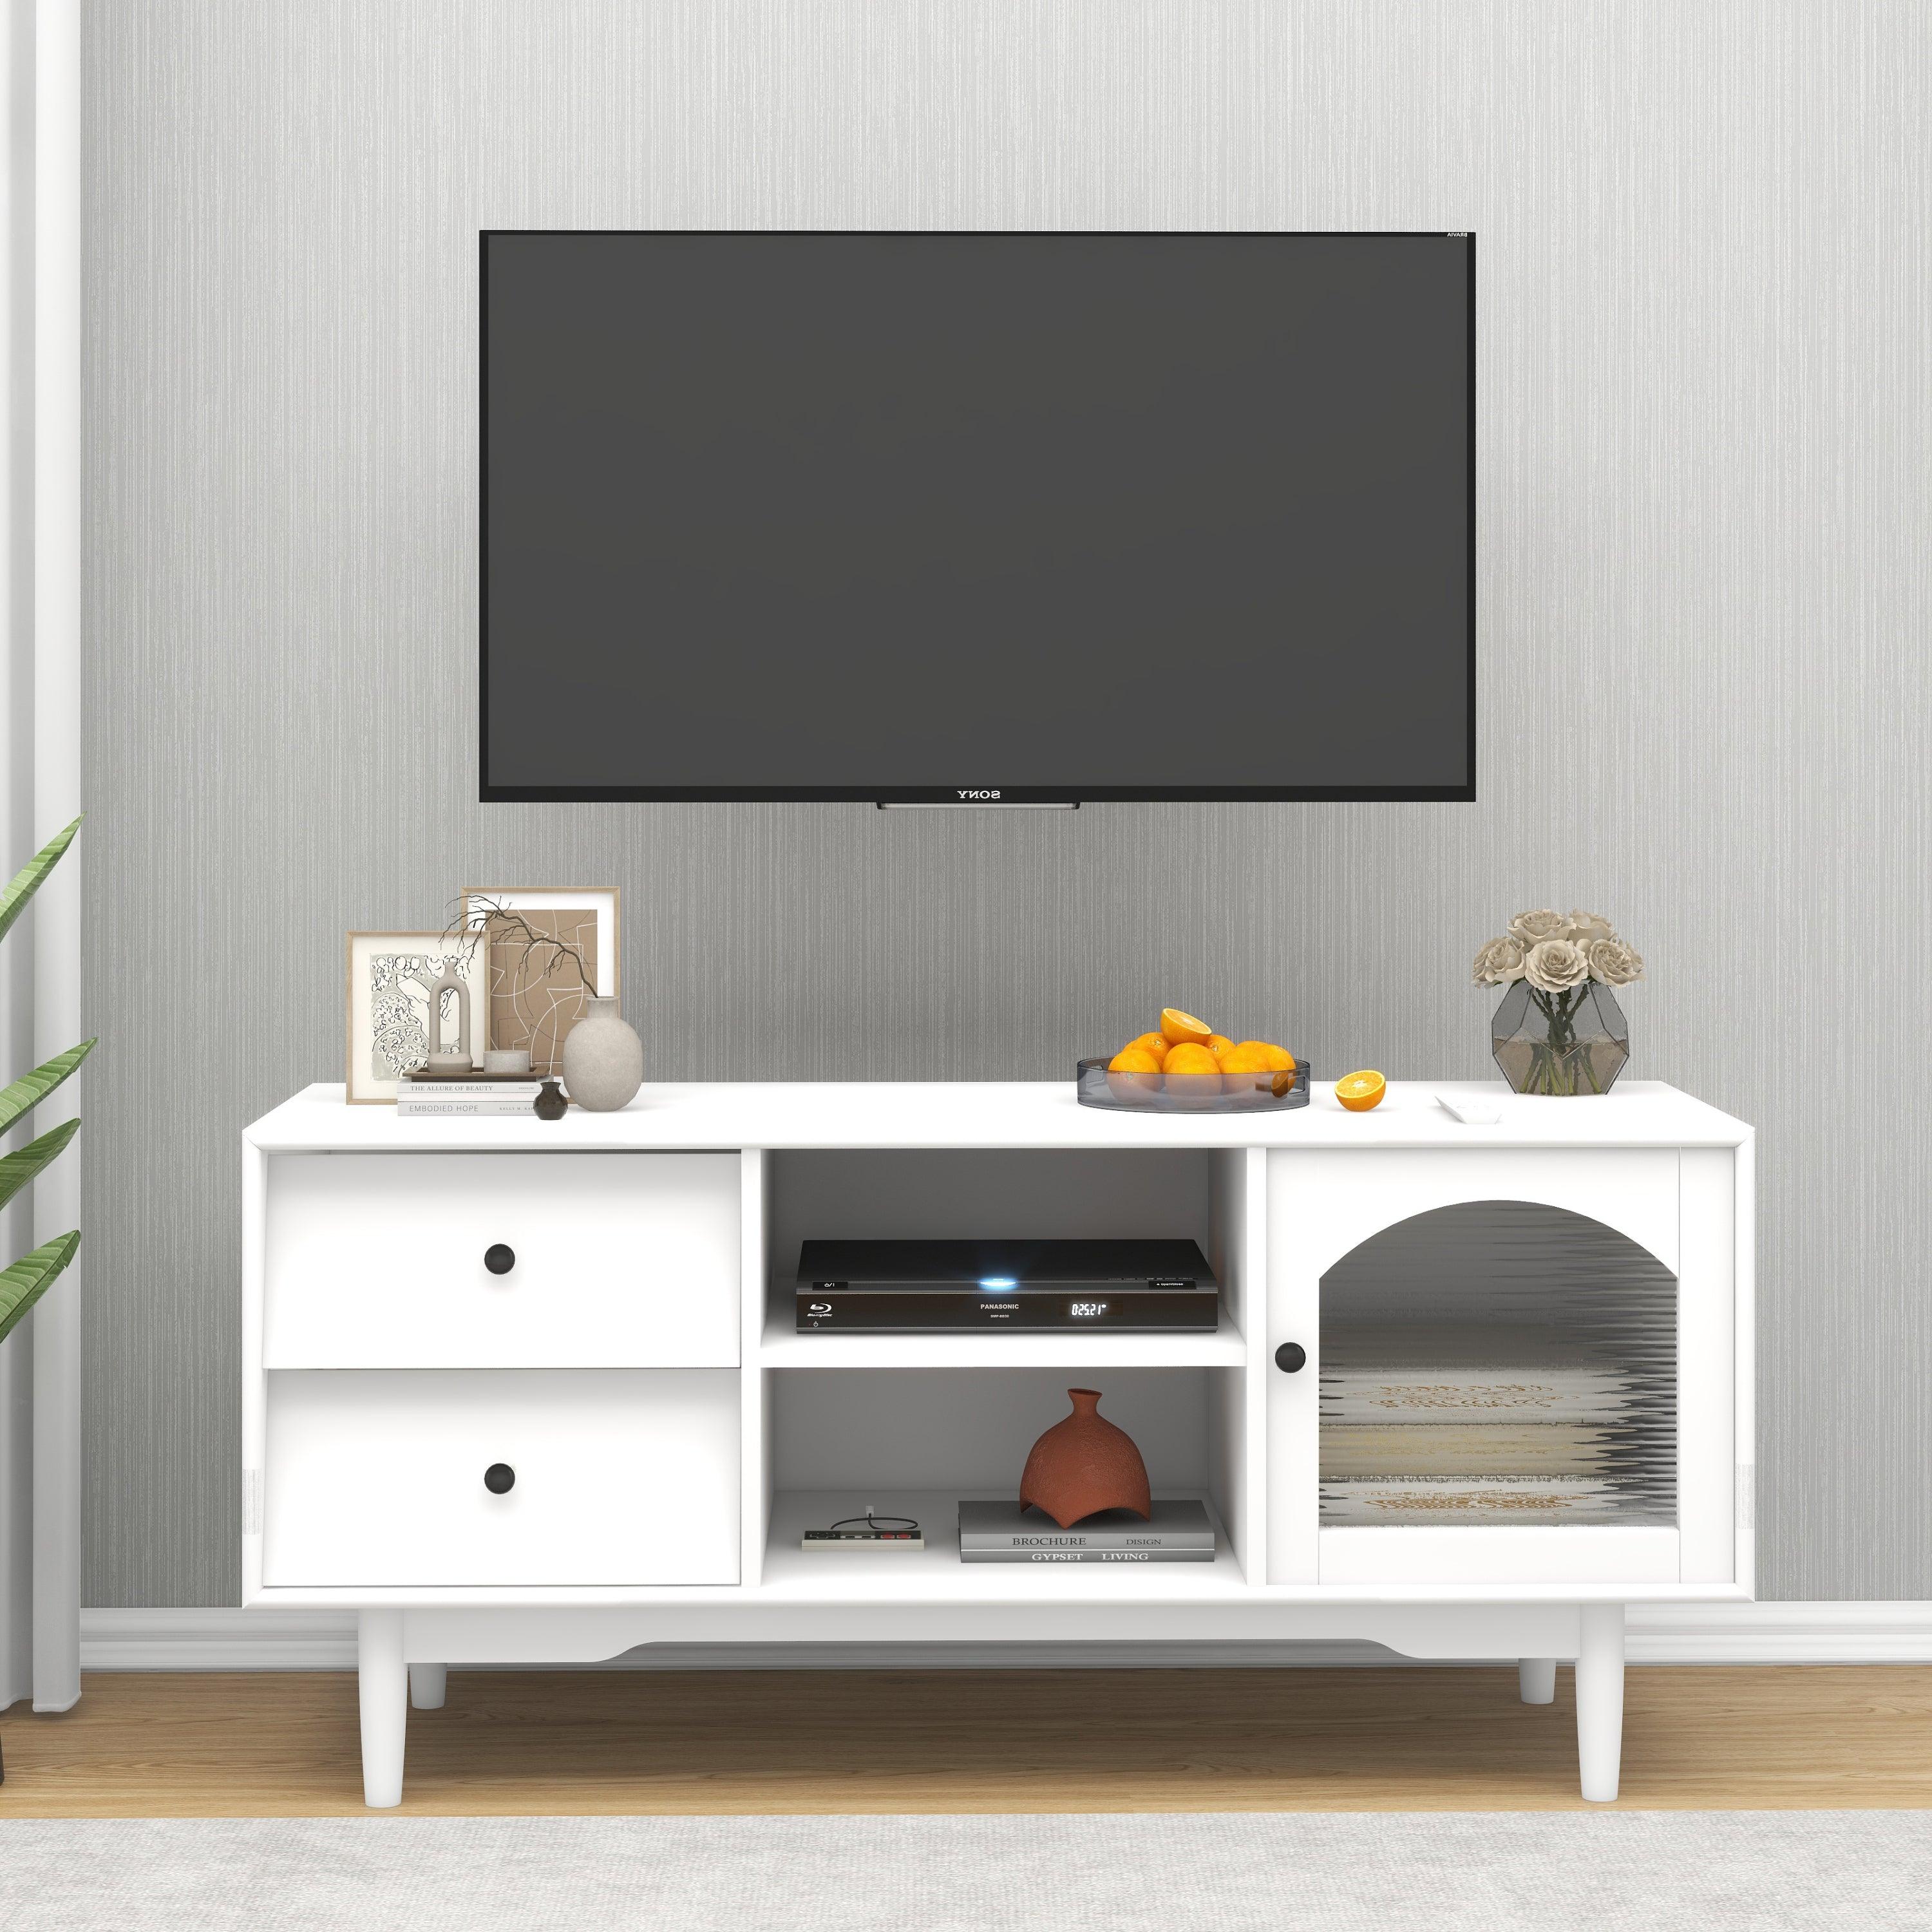 🆓🚛 Living Room White Tv Stand With Drawers & Open Shelves, a Cabinet With Glass Doors for Storage